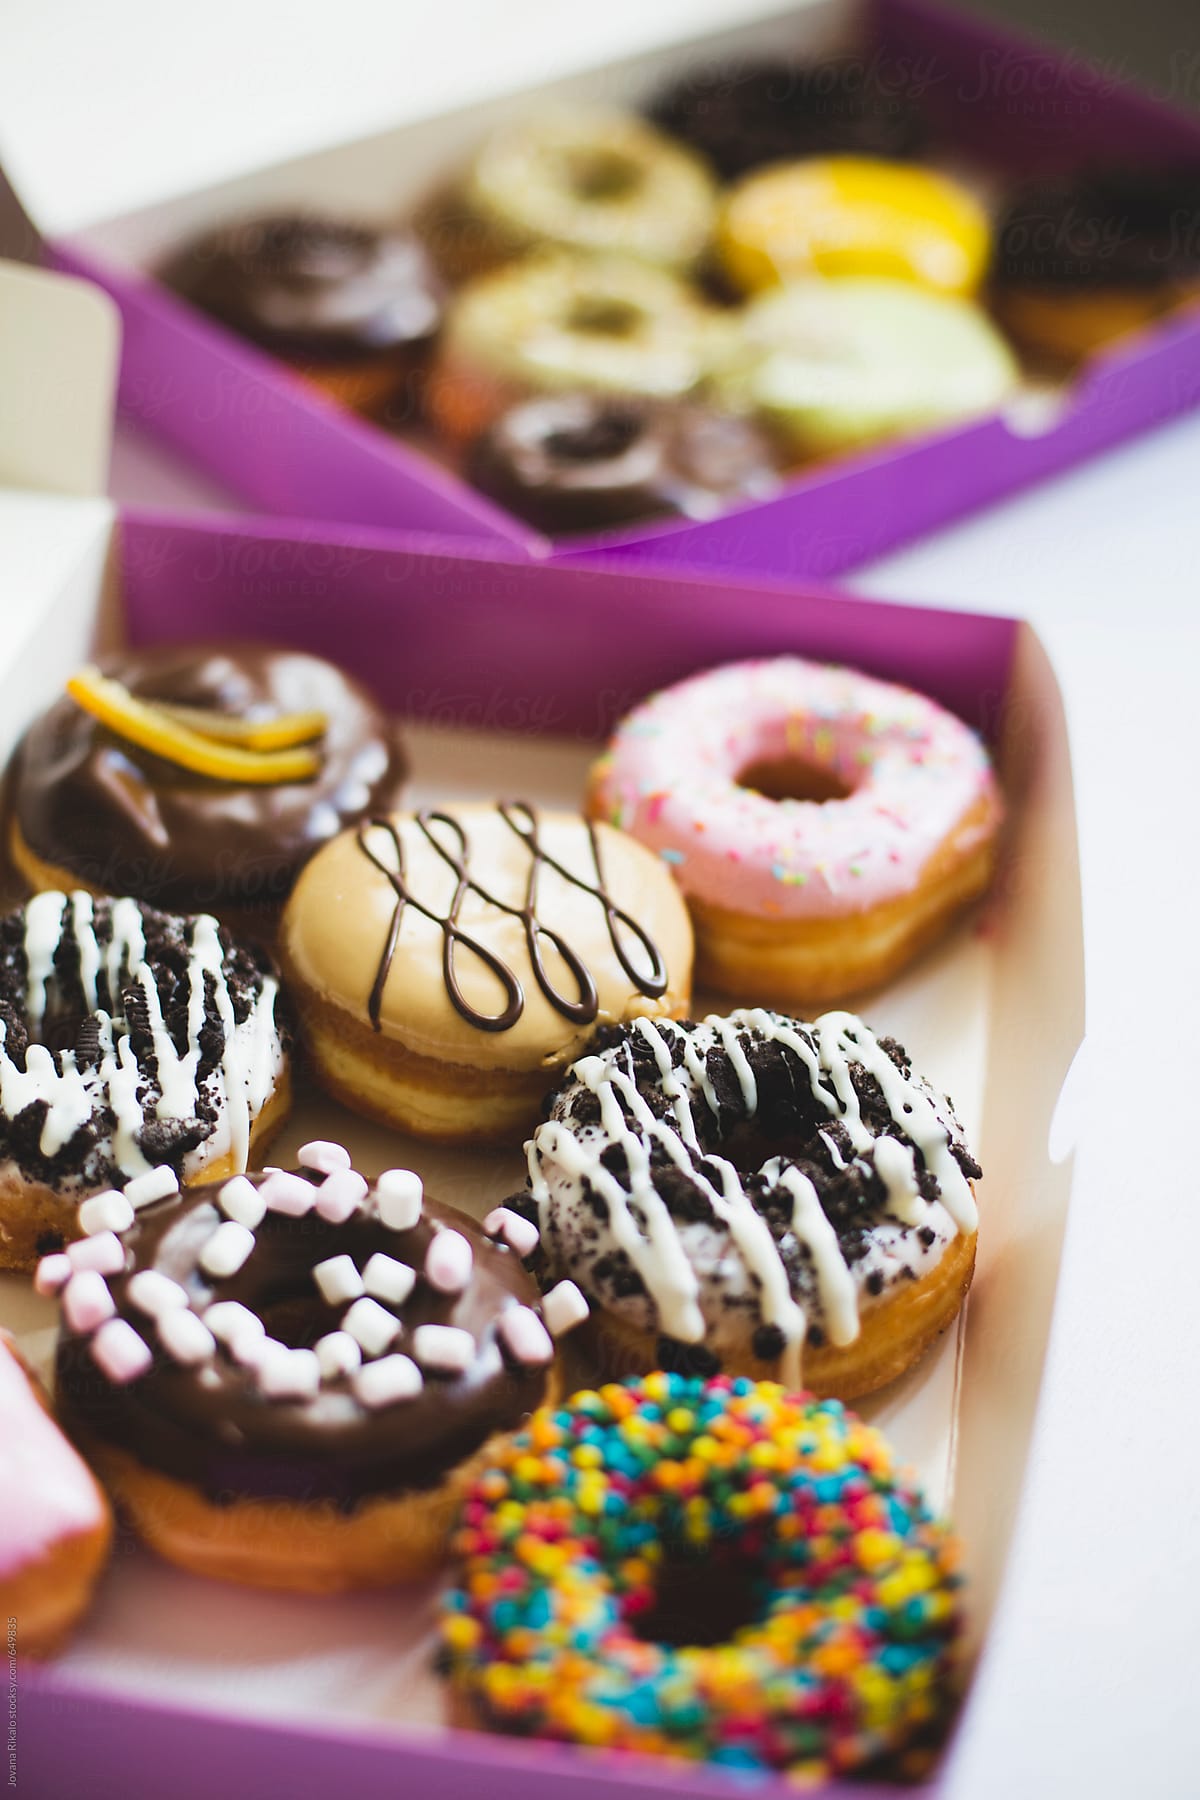 Colorful donuts in a takeaway box